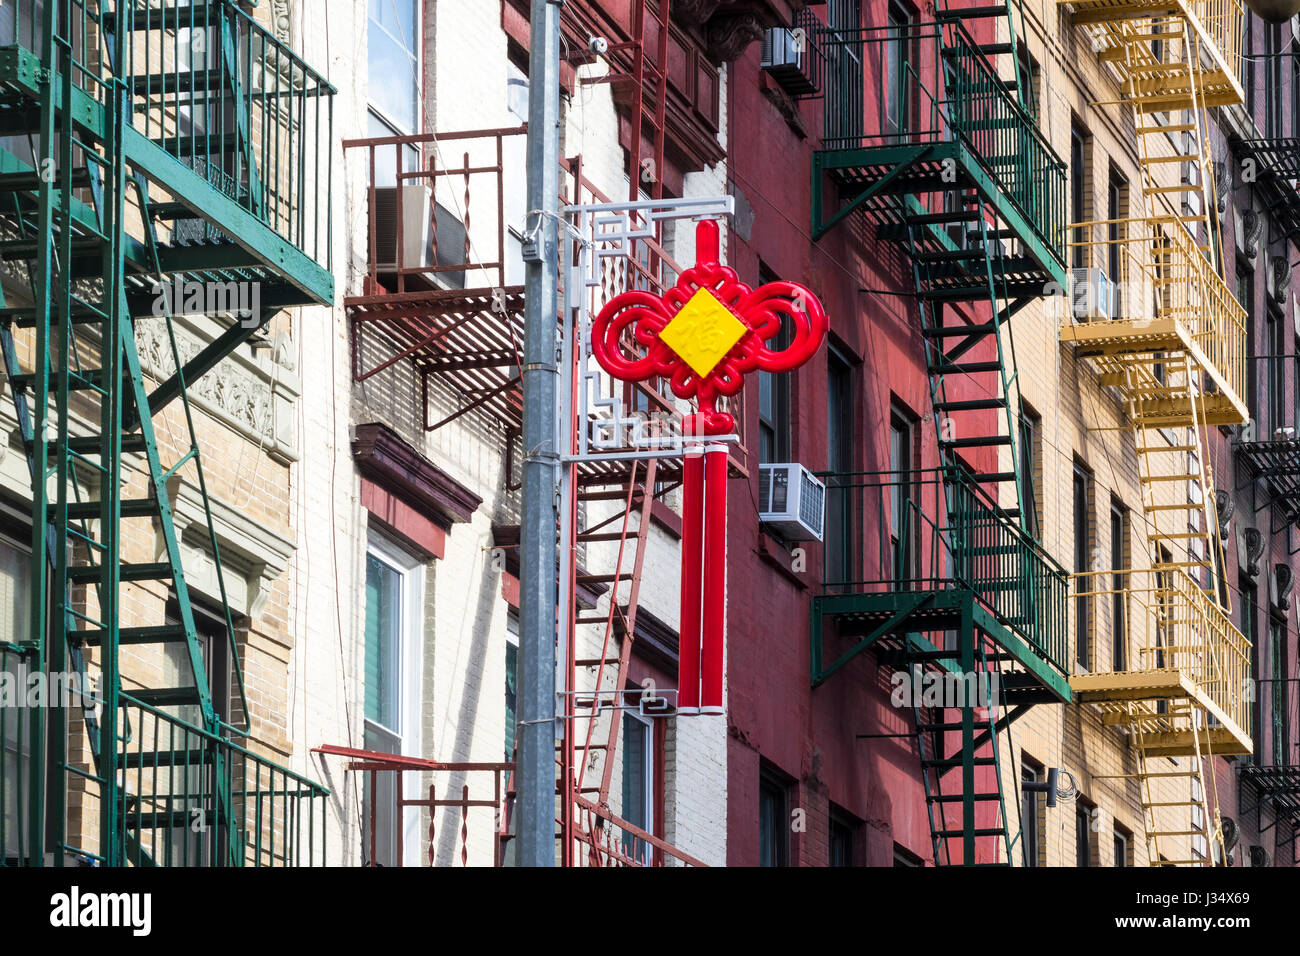 Red and yellow good luck icon in Chinatown, New York. The rounded sides say good fortune for all to share. Stock Photo